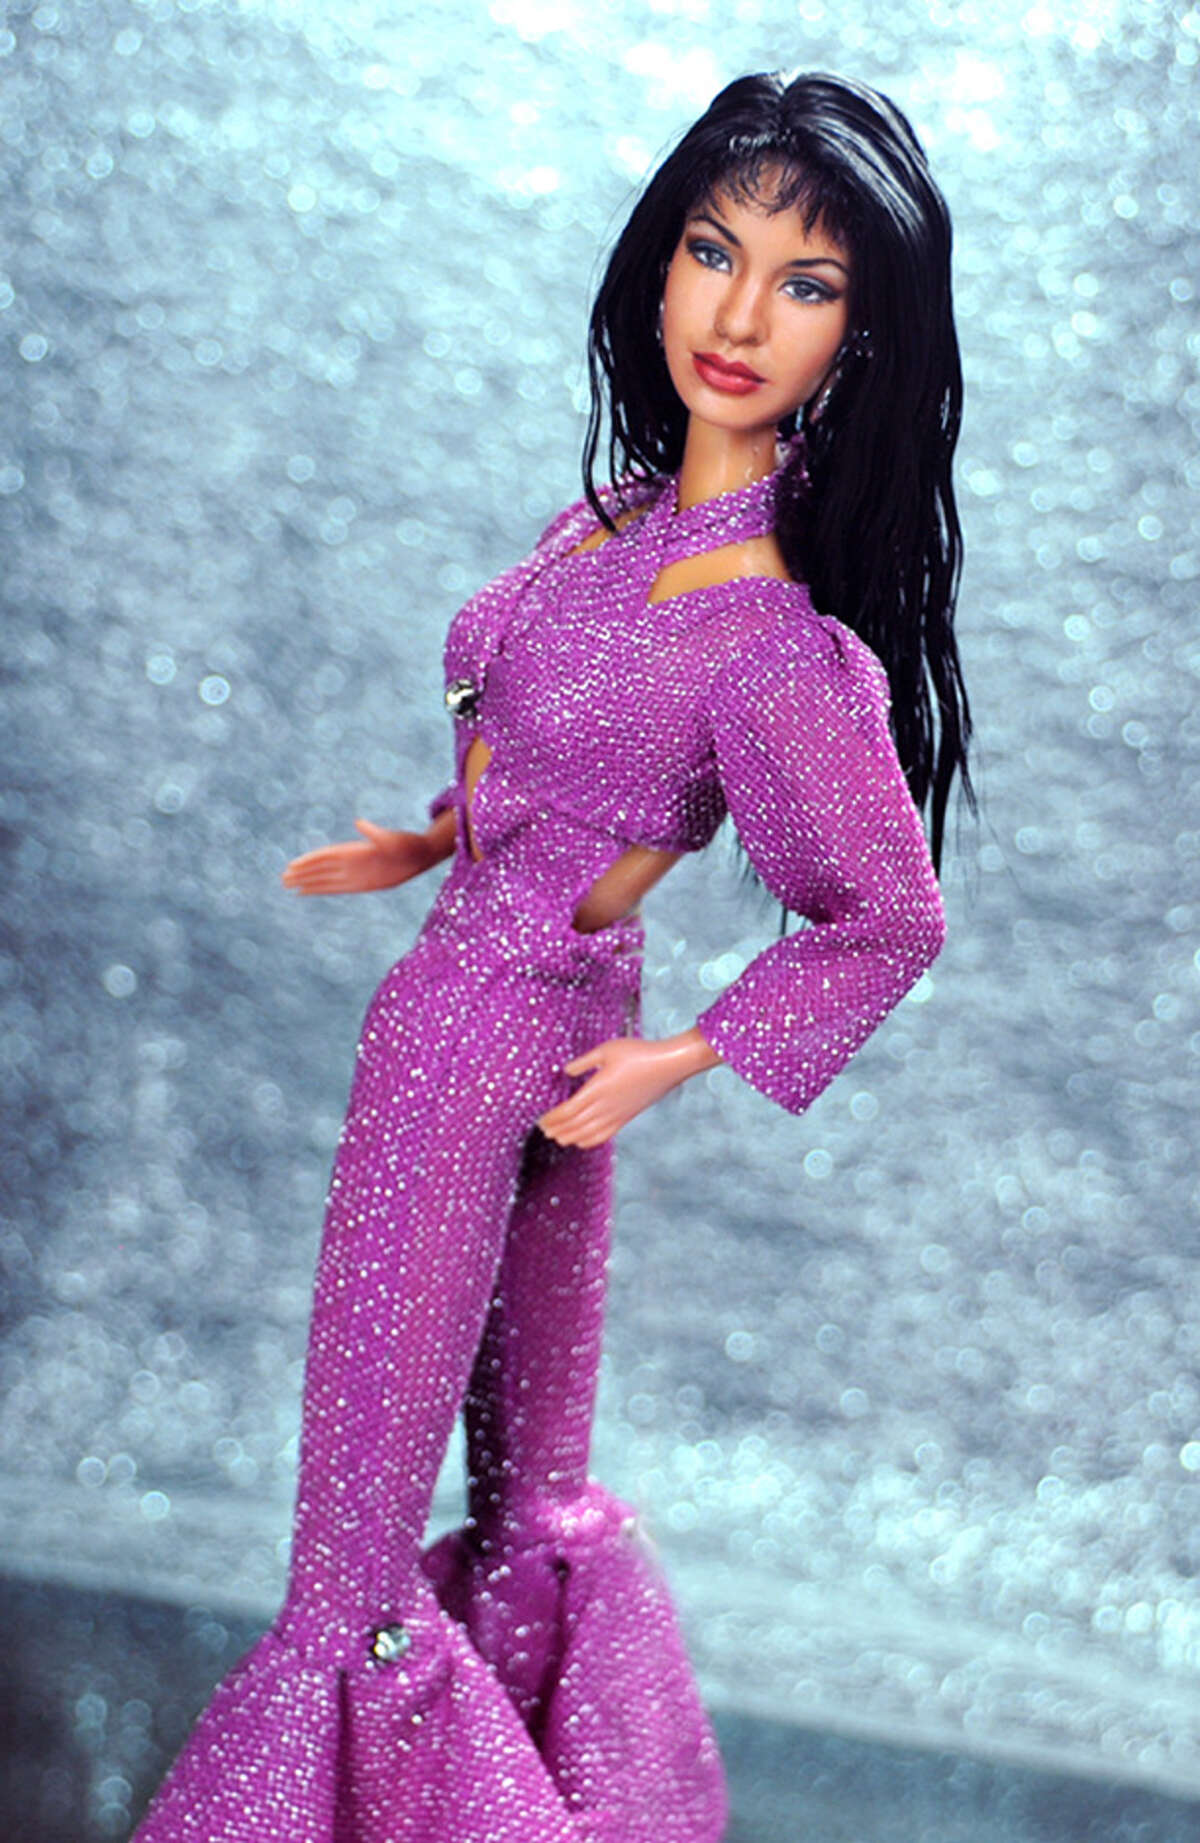 With the 20th anniversary of Selena’s death approaching, an artist has repainted and sold a Selena Quintanilla doll for over a thousand dollars on eBay.